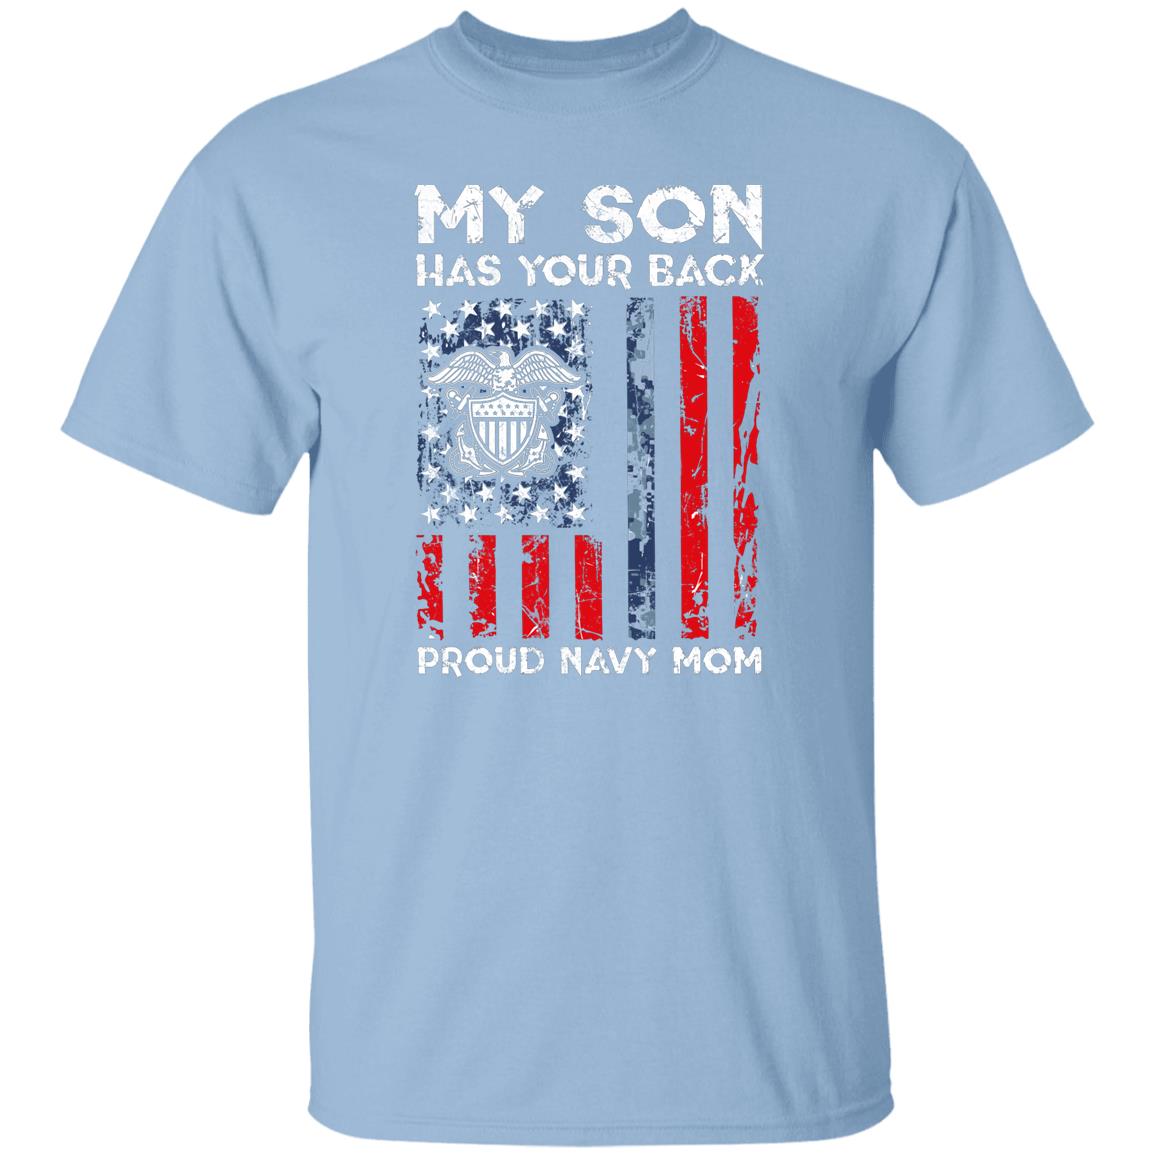 My Son Has Your Back - Proud Navy Mom G500 5.3 oz. T-Shirt